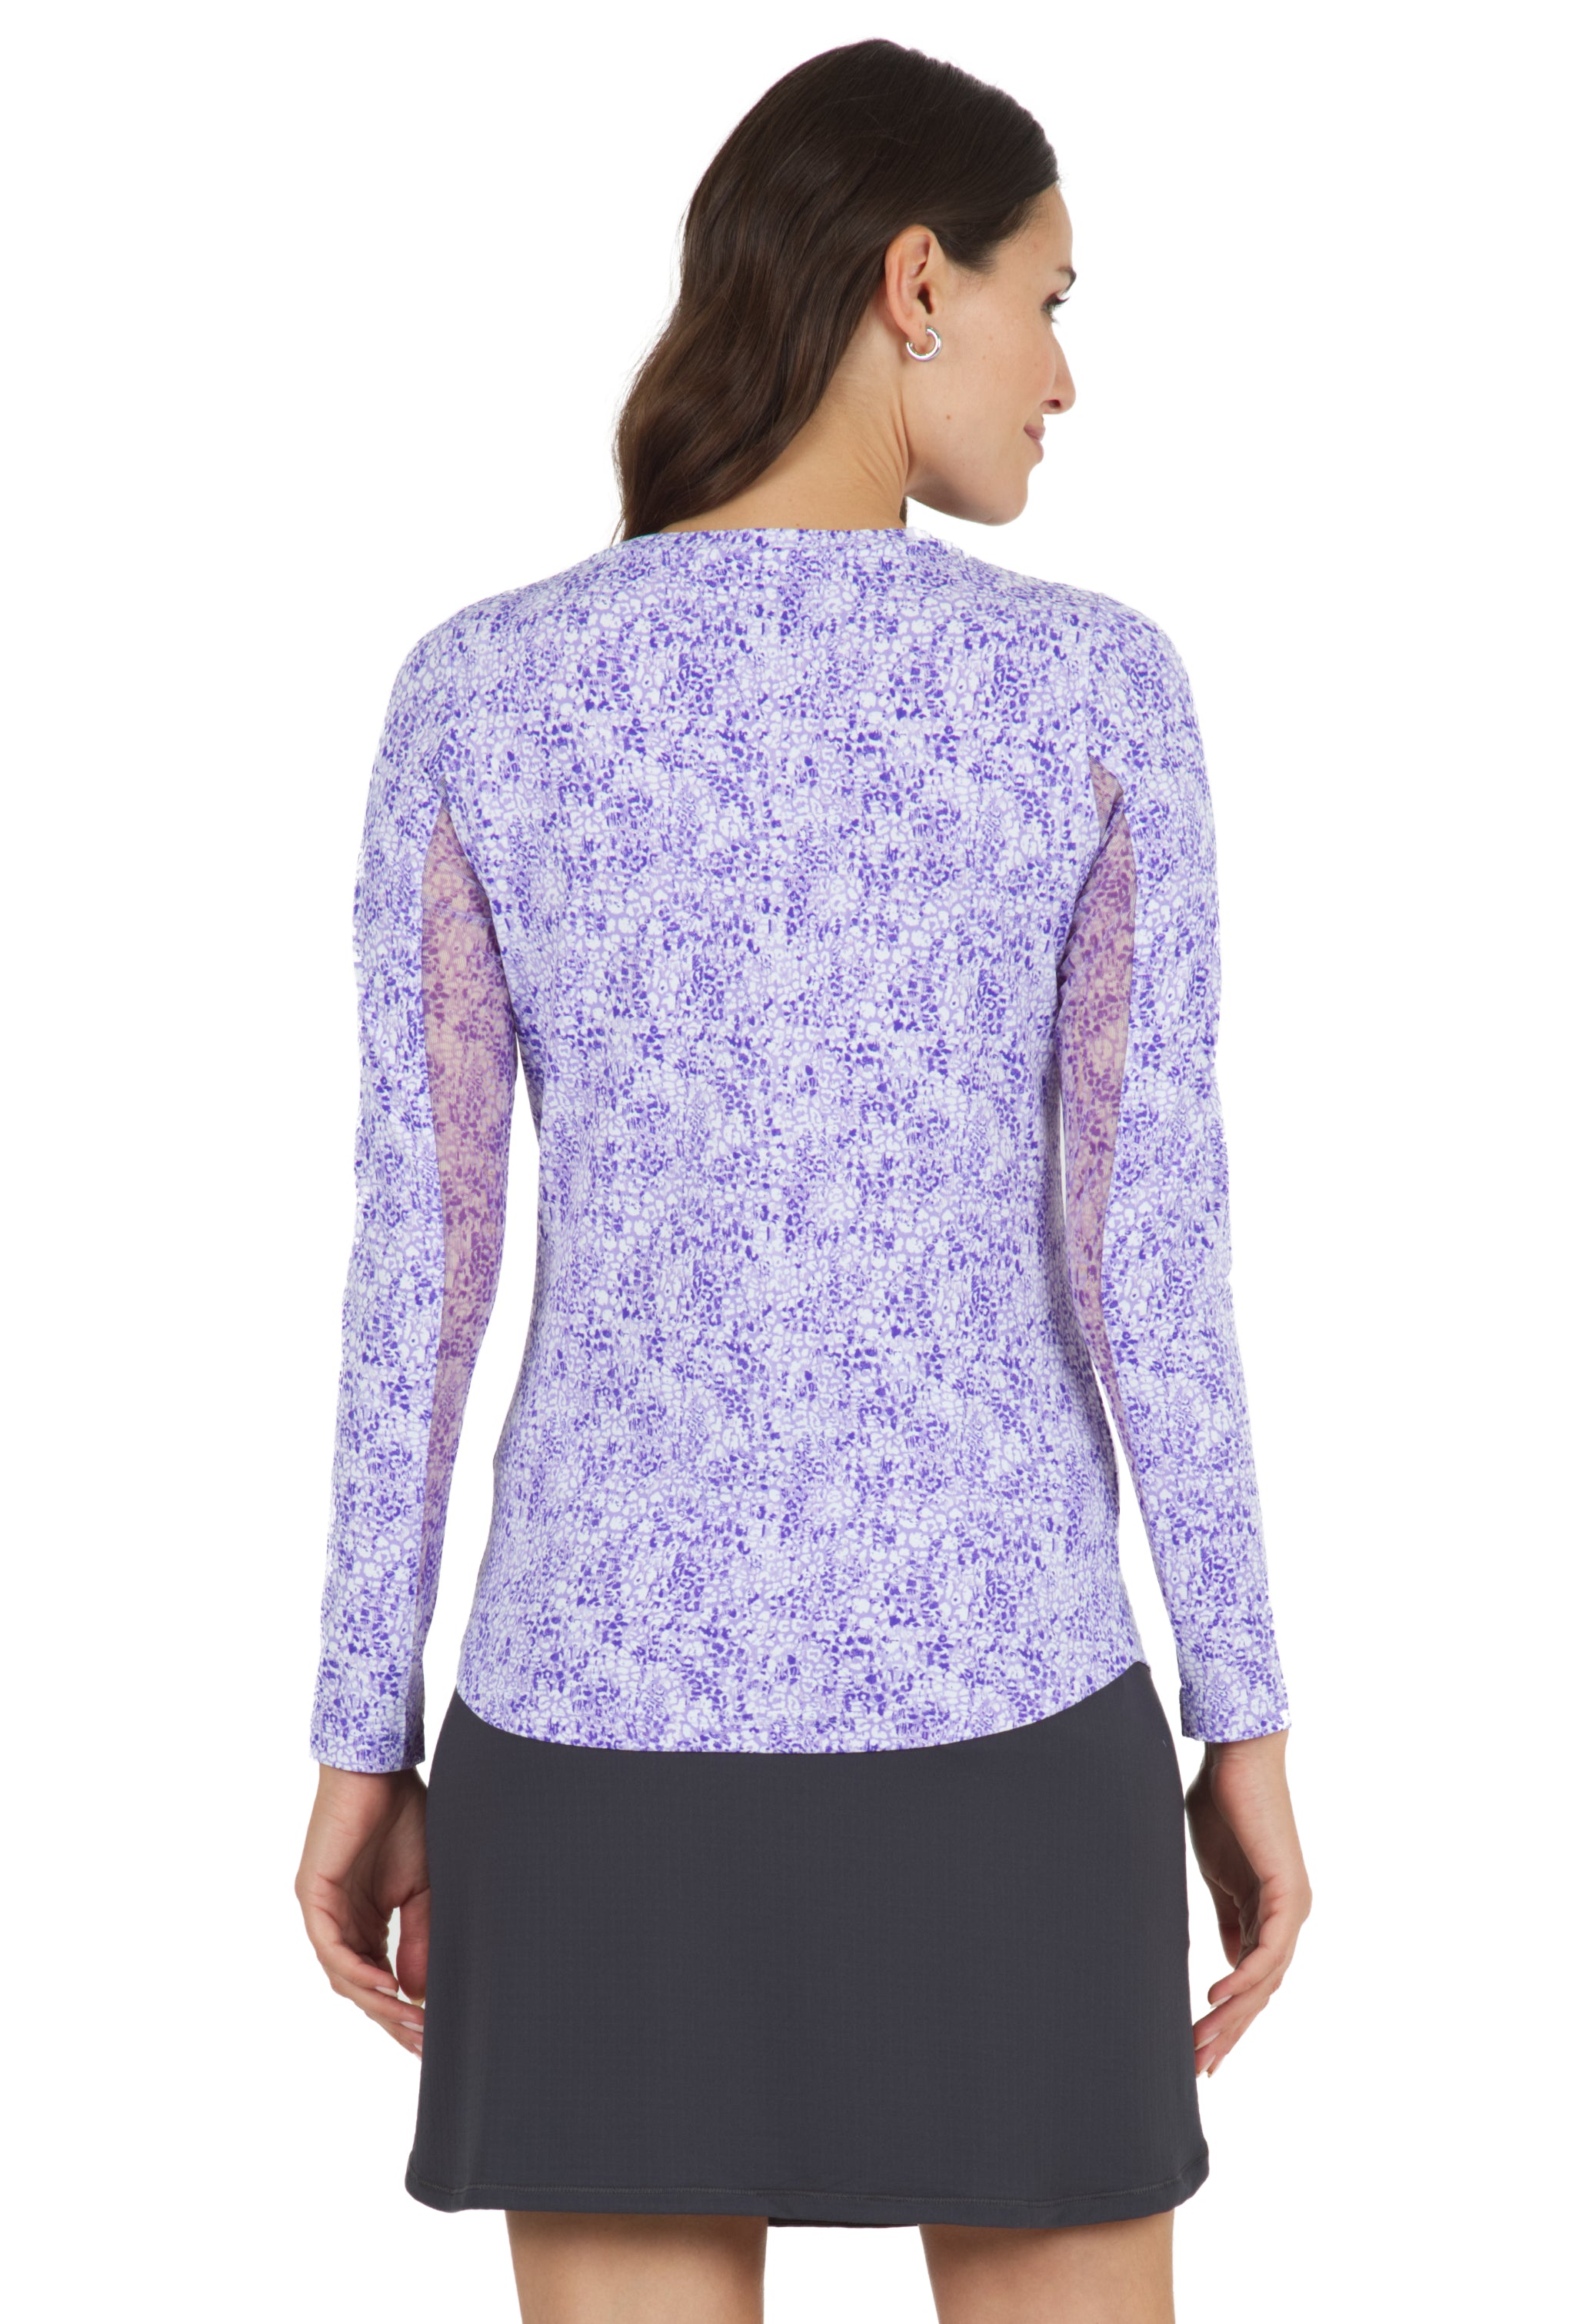 Abstract Skin Print Long Sleeve Crew Neck – 12487